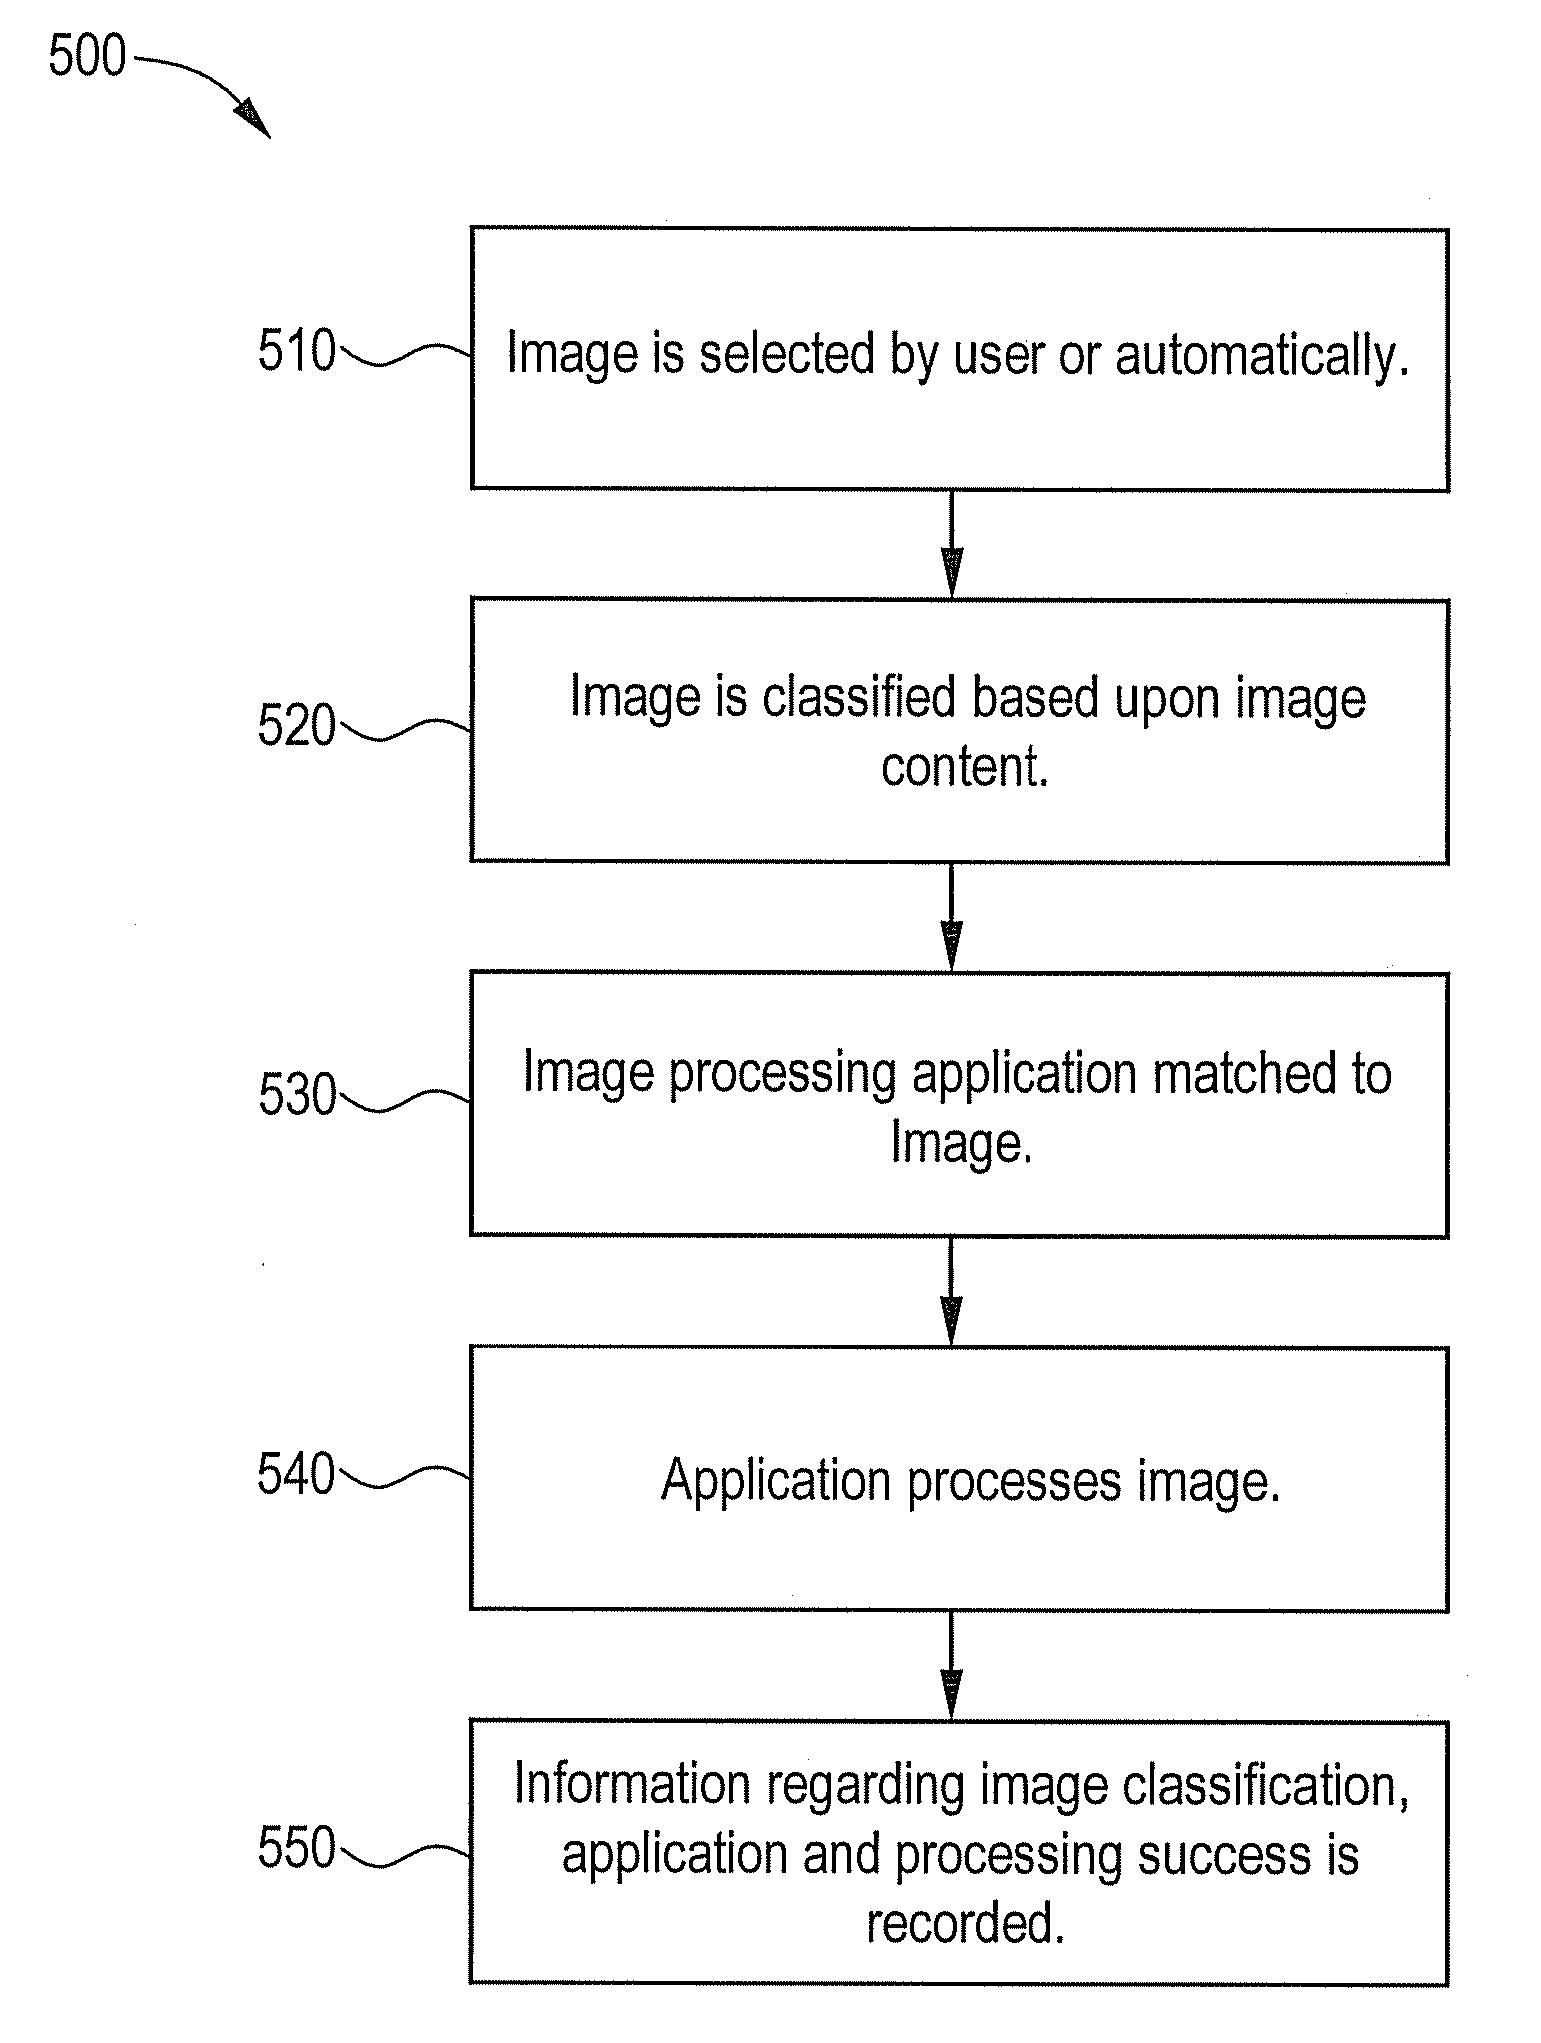 Methods and systems for selecting an image application based on image content